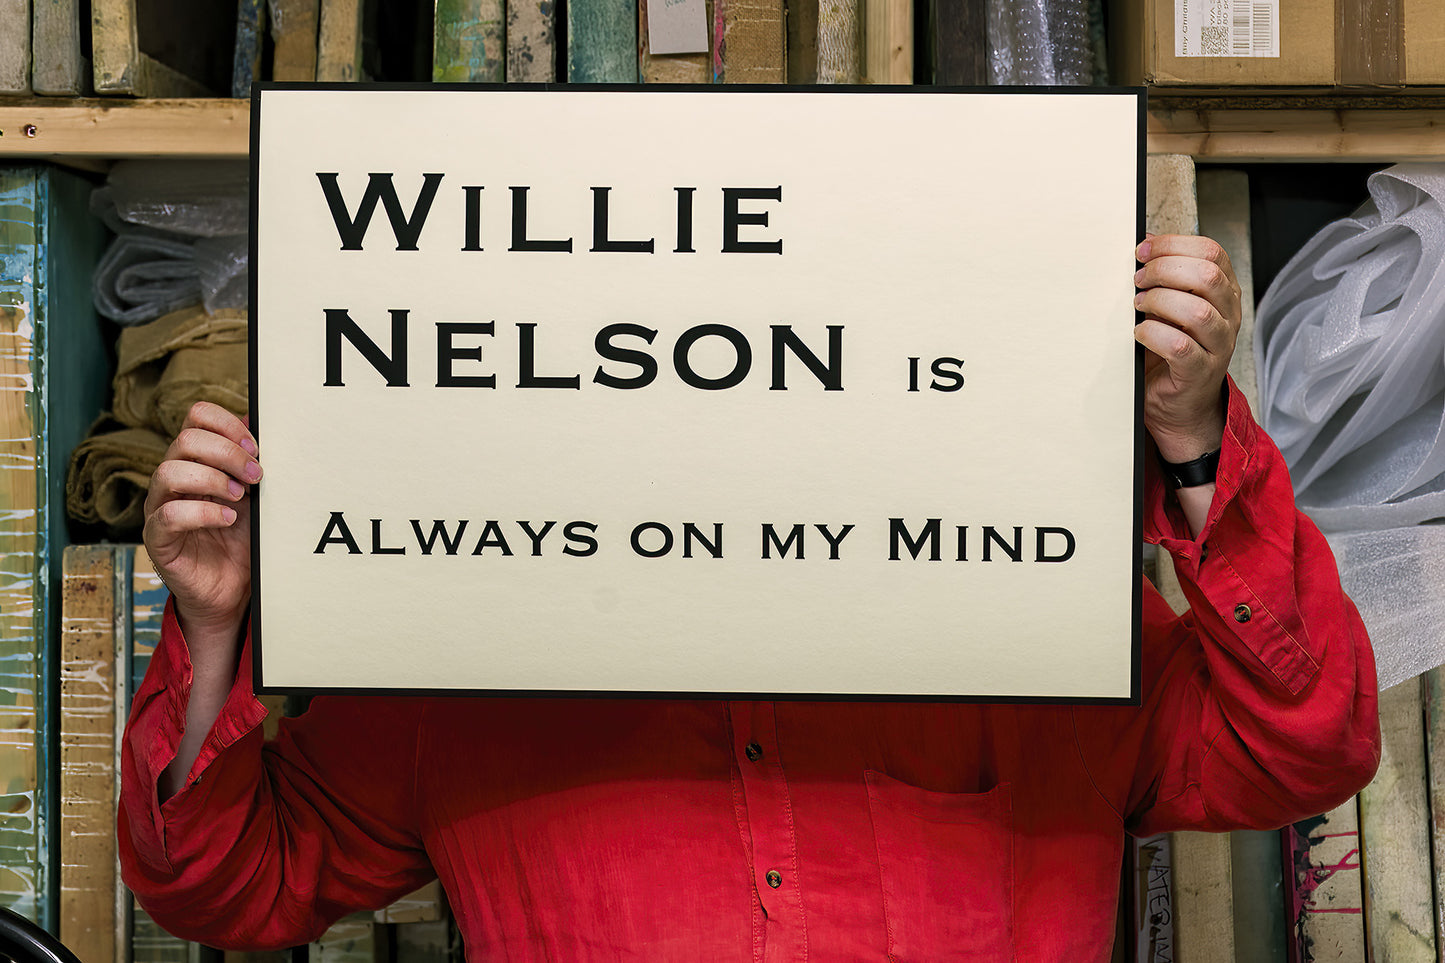 Willie Nelson - print by Jeremy Deller